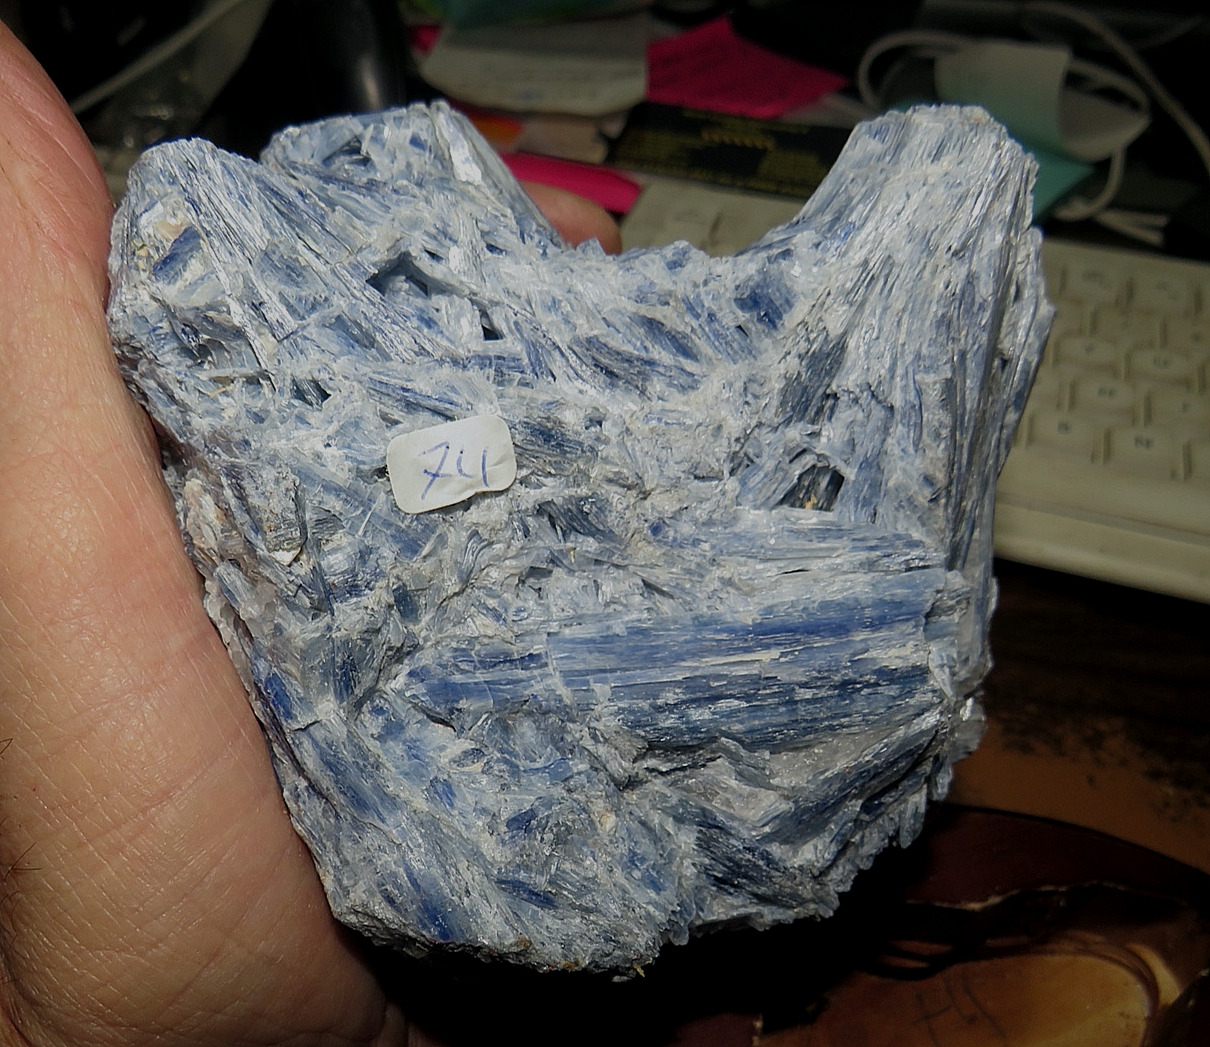 GORGEOUS HUGE SPECIMEN OF BLUE KYANITE IN A WOOD STAND